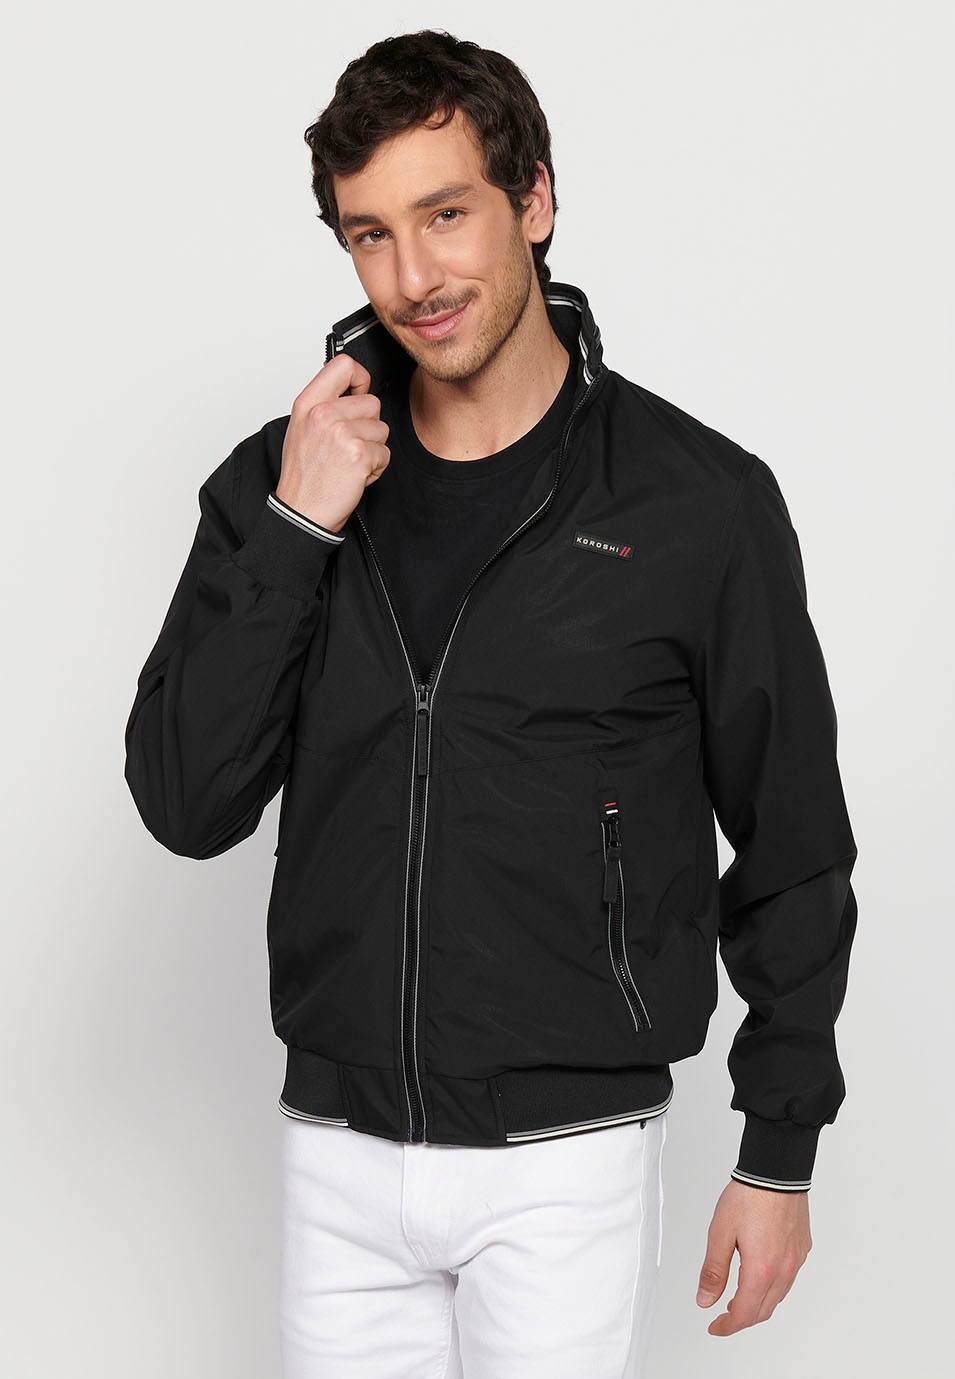 Long-sleeved high-neck windbreaker jacket with front zipper closure and ribbed finishes with pockets, one inside in Black for Men